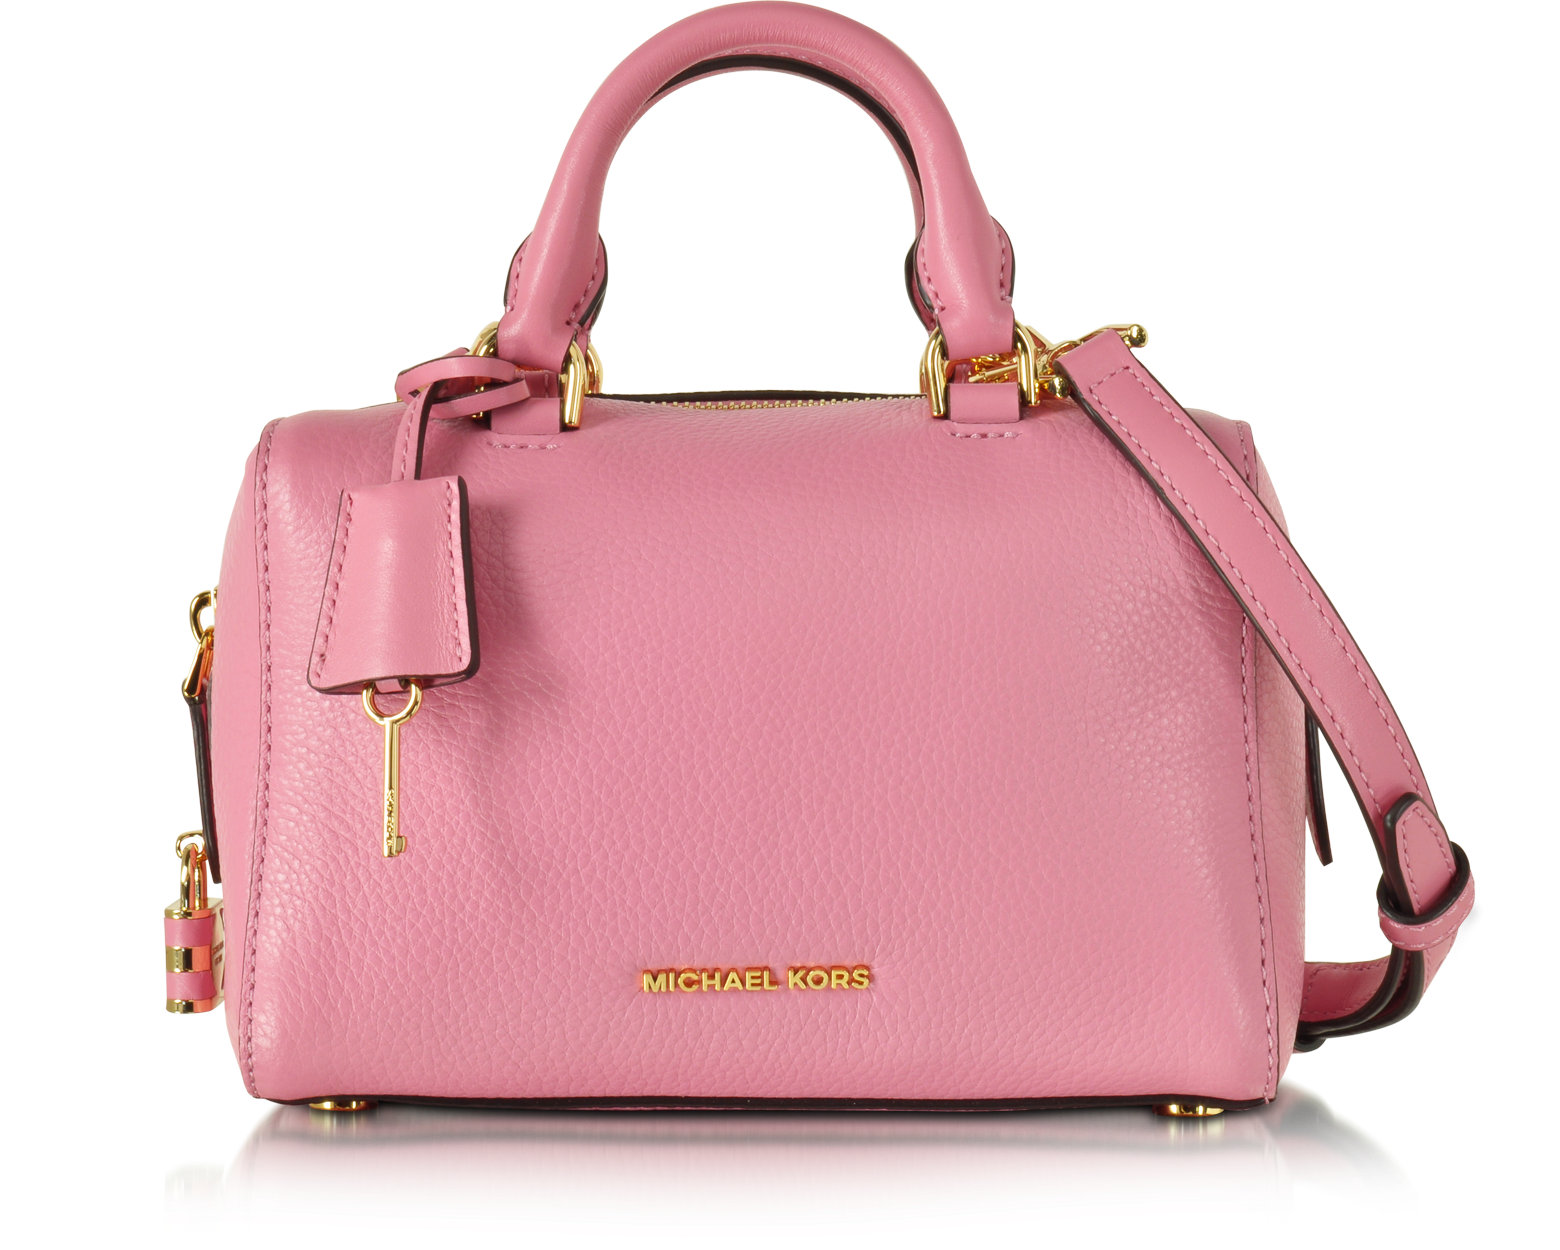 Michael Kors Kirby Misty Rose XS Leather Satchel Bag at FORZIERI